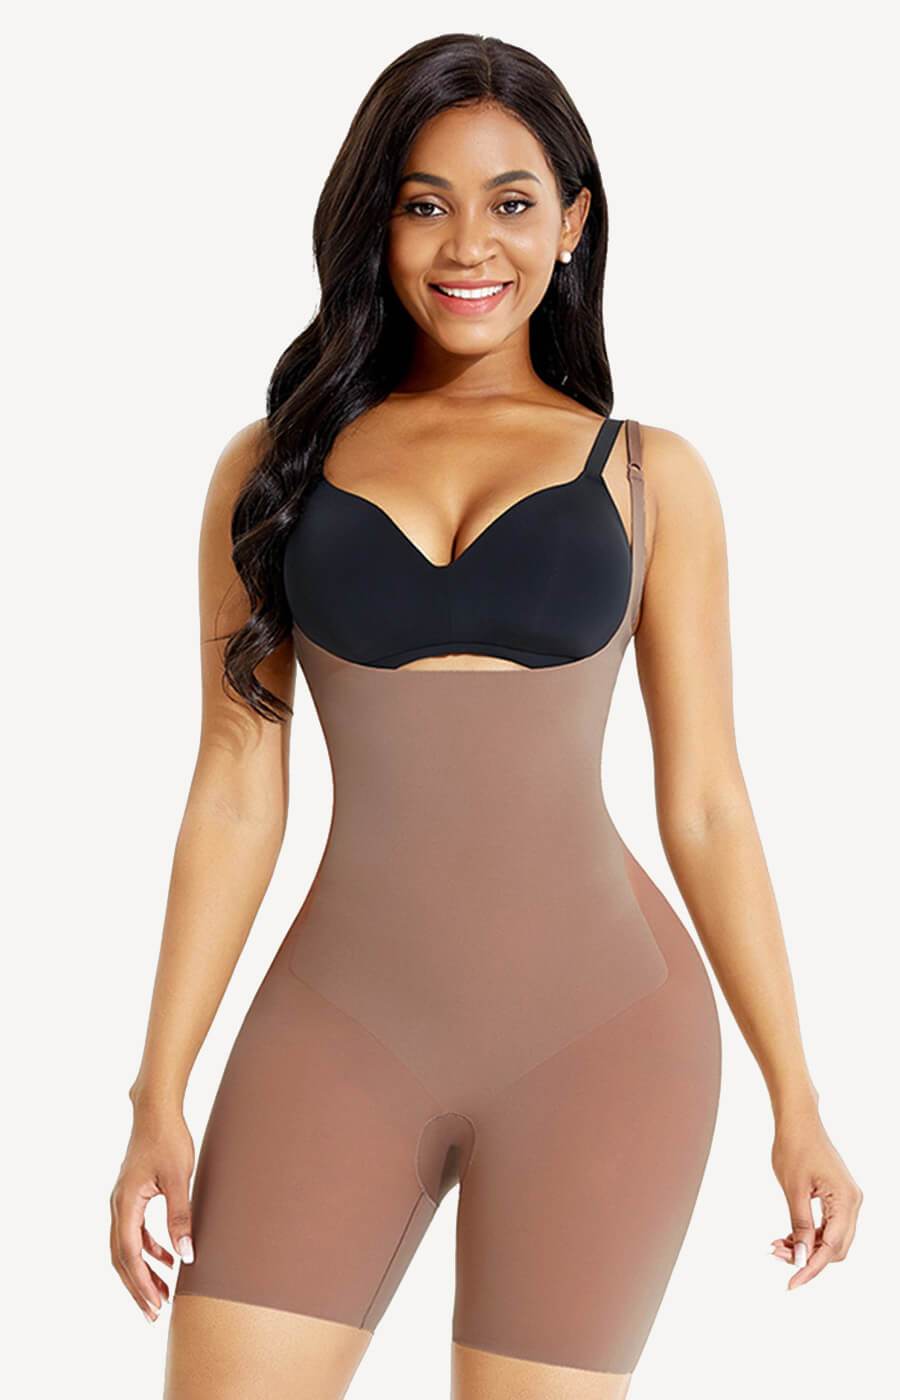 Loverbeauty Tummy Control Bodysuit Shapewear With Crotchless Shaper Panty